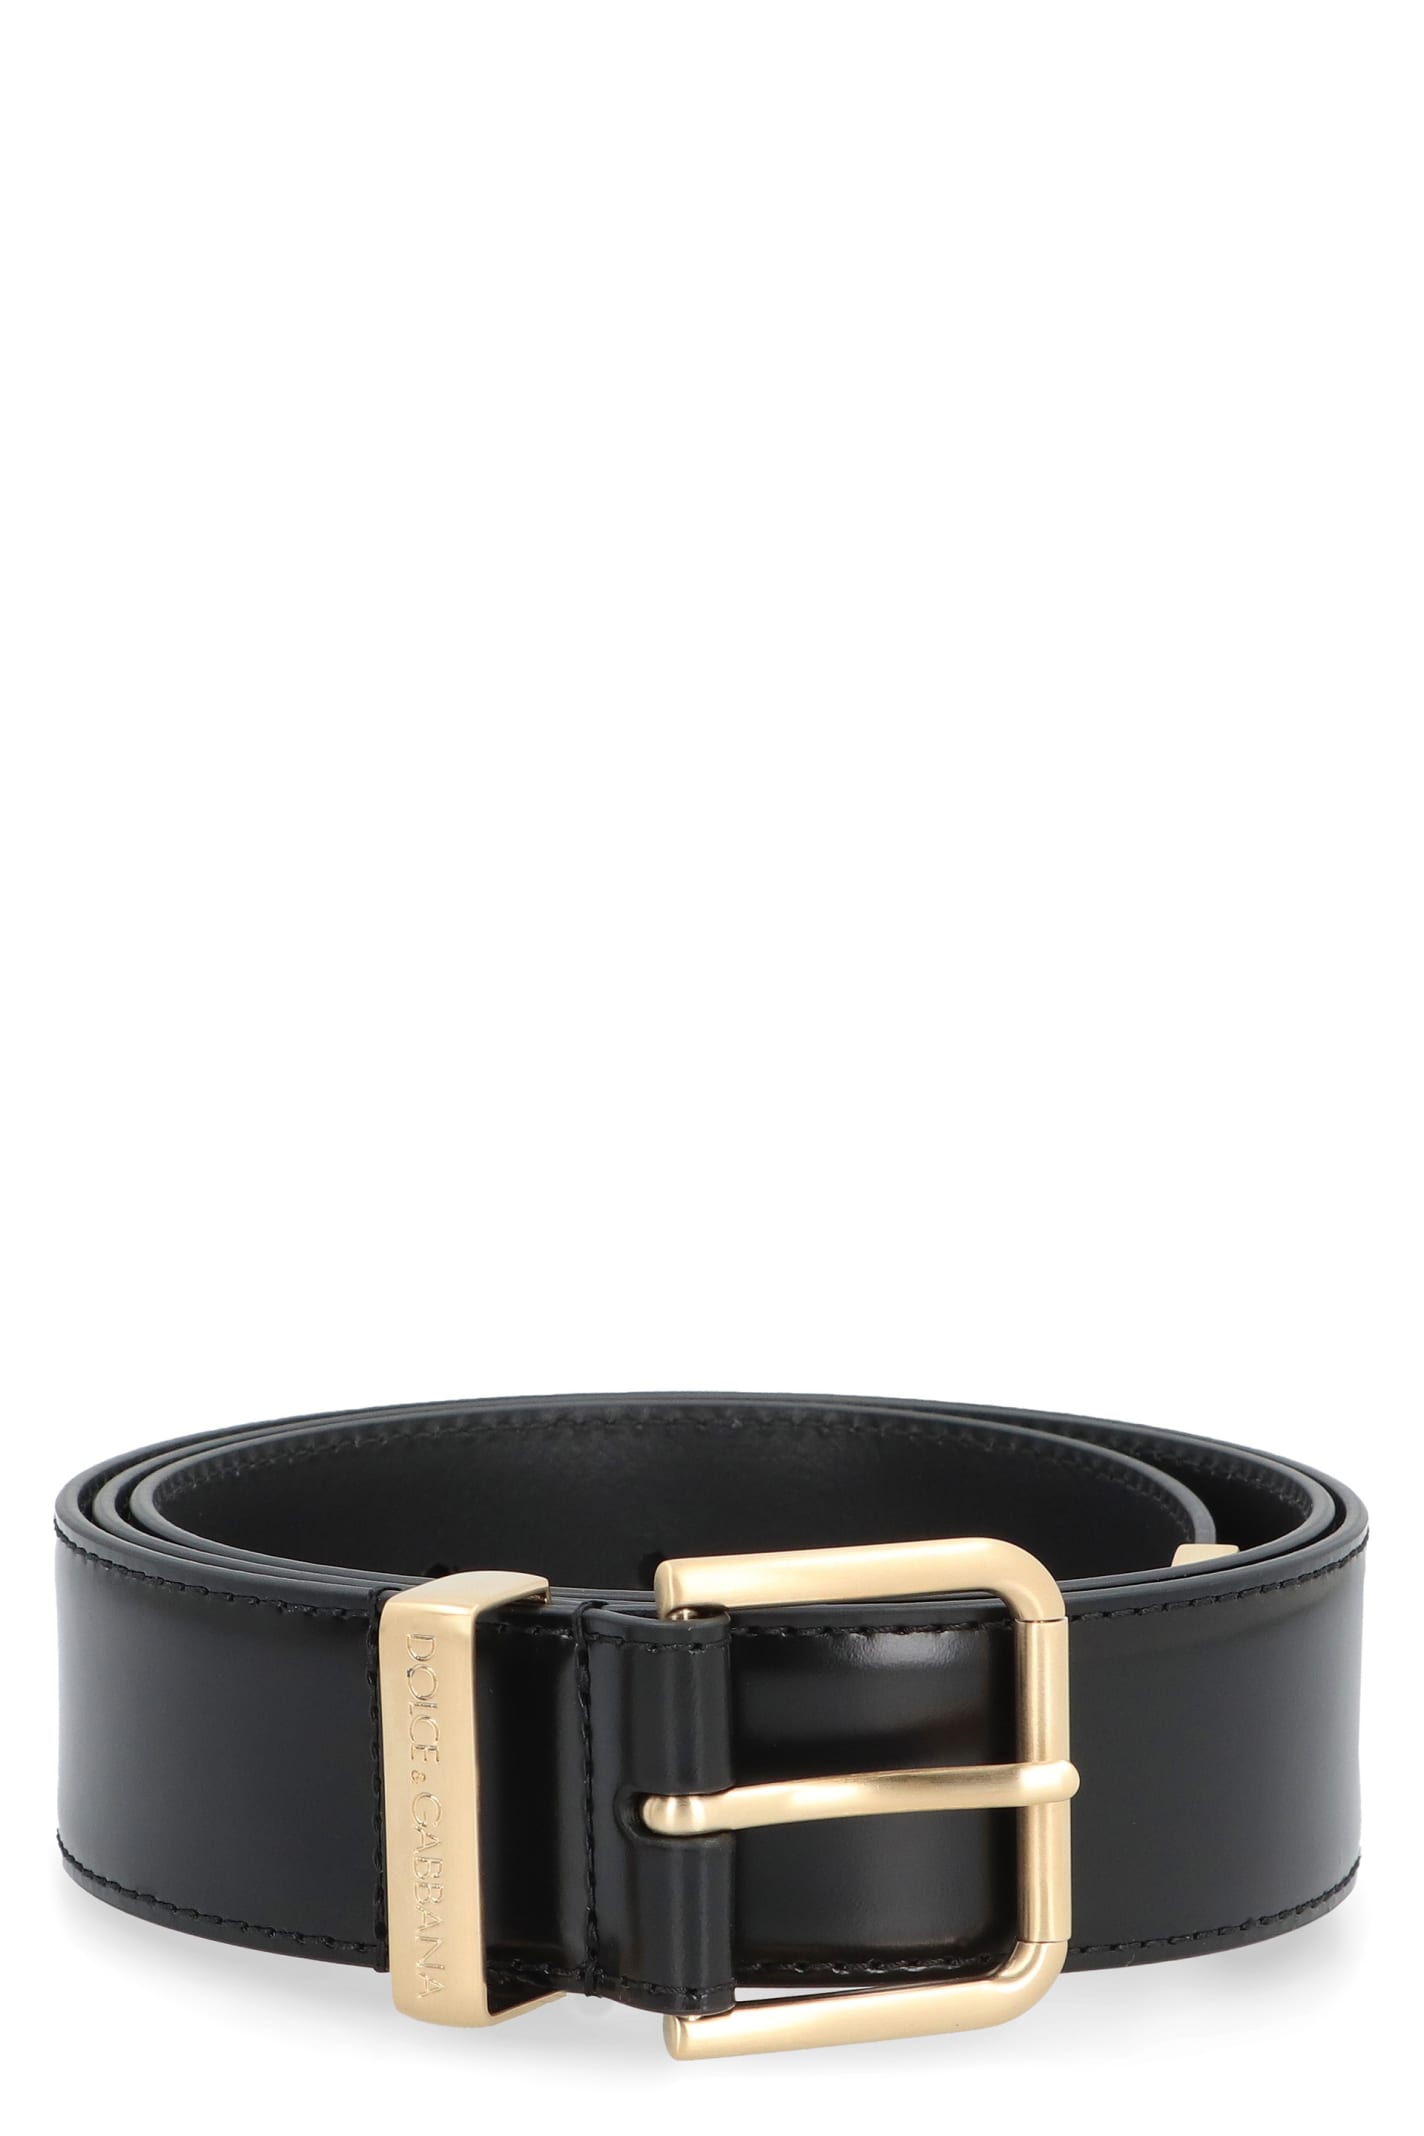 DOLCE & GABBANA CALF LEATHER BELT WITH BUCKLE